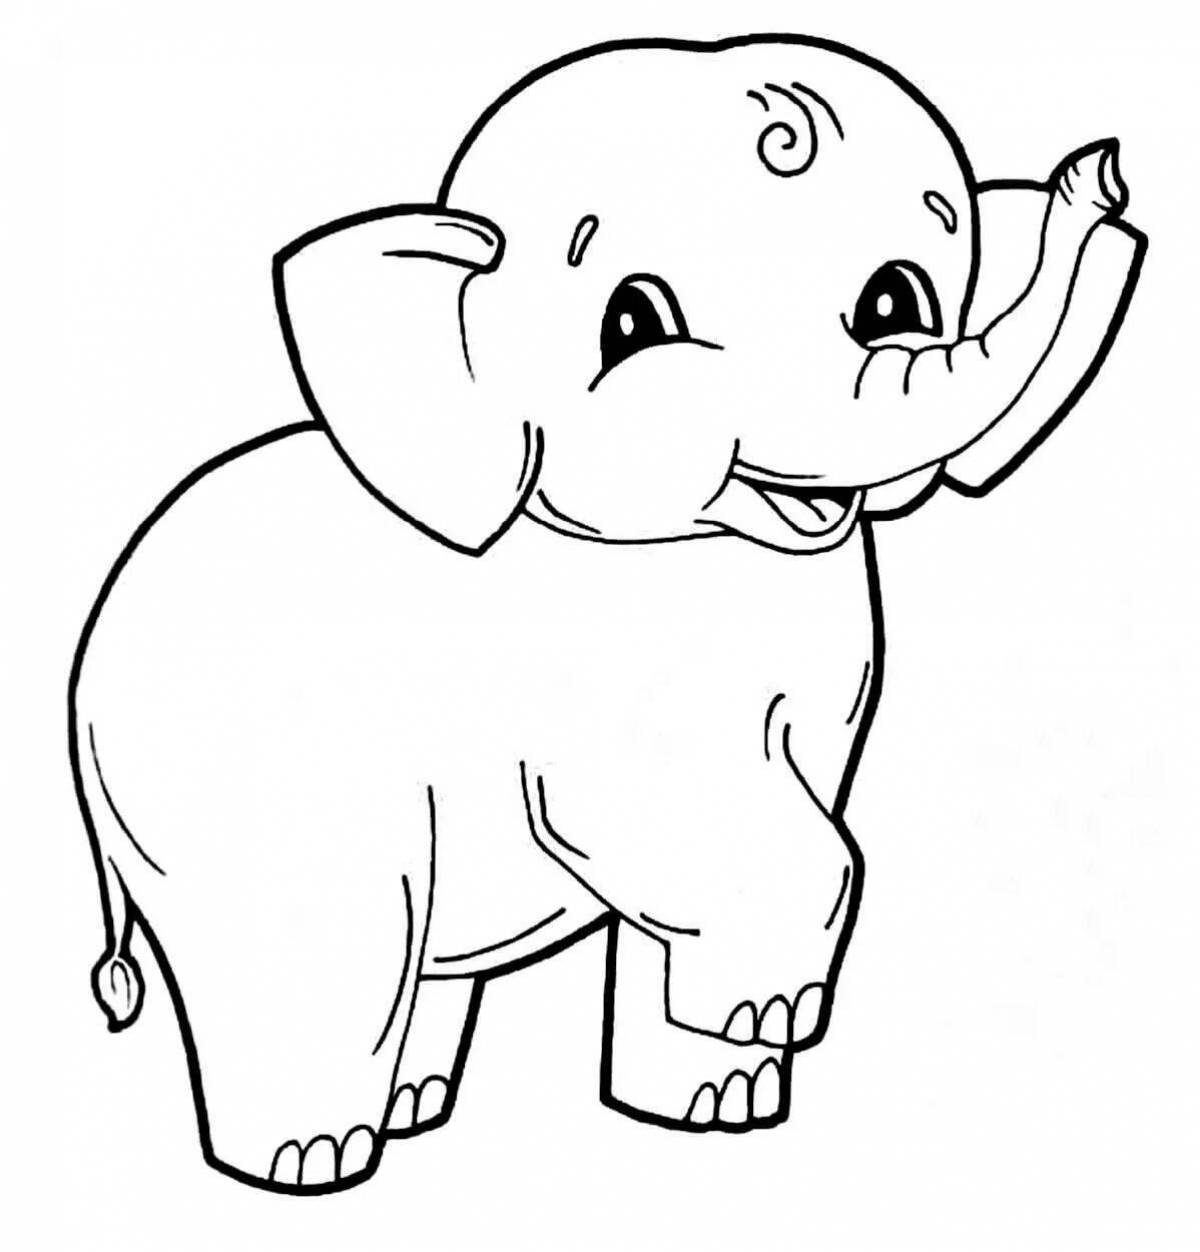 Coloring book nice elephant